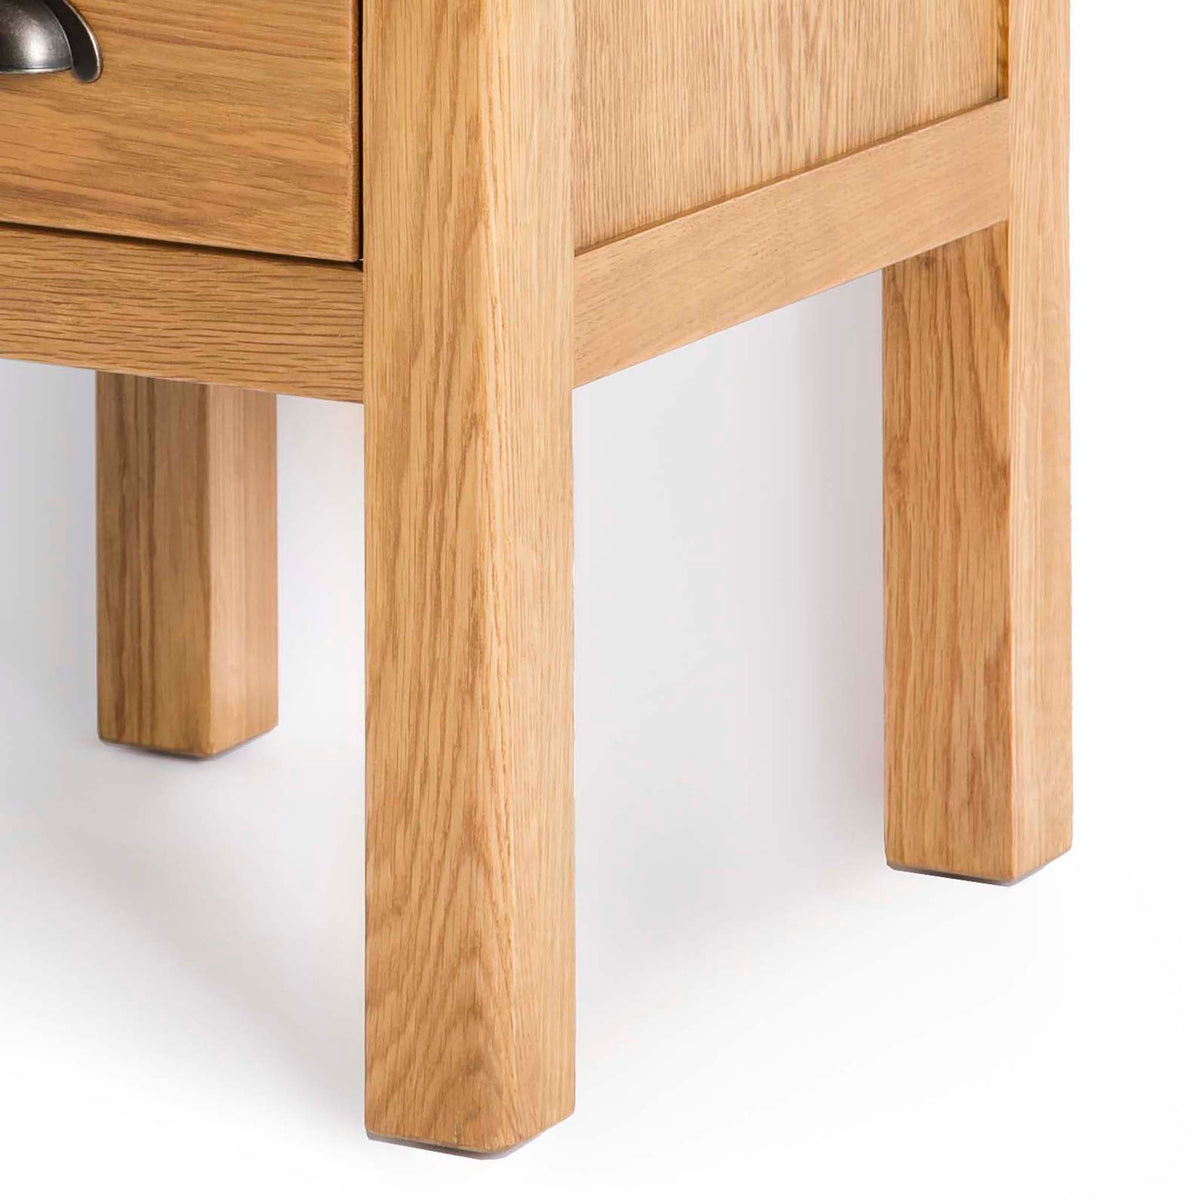 Roseland Oak Lamp Side Table - Close up of legs of table